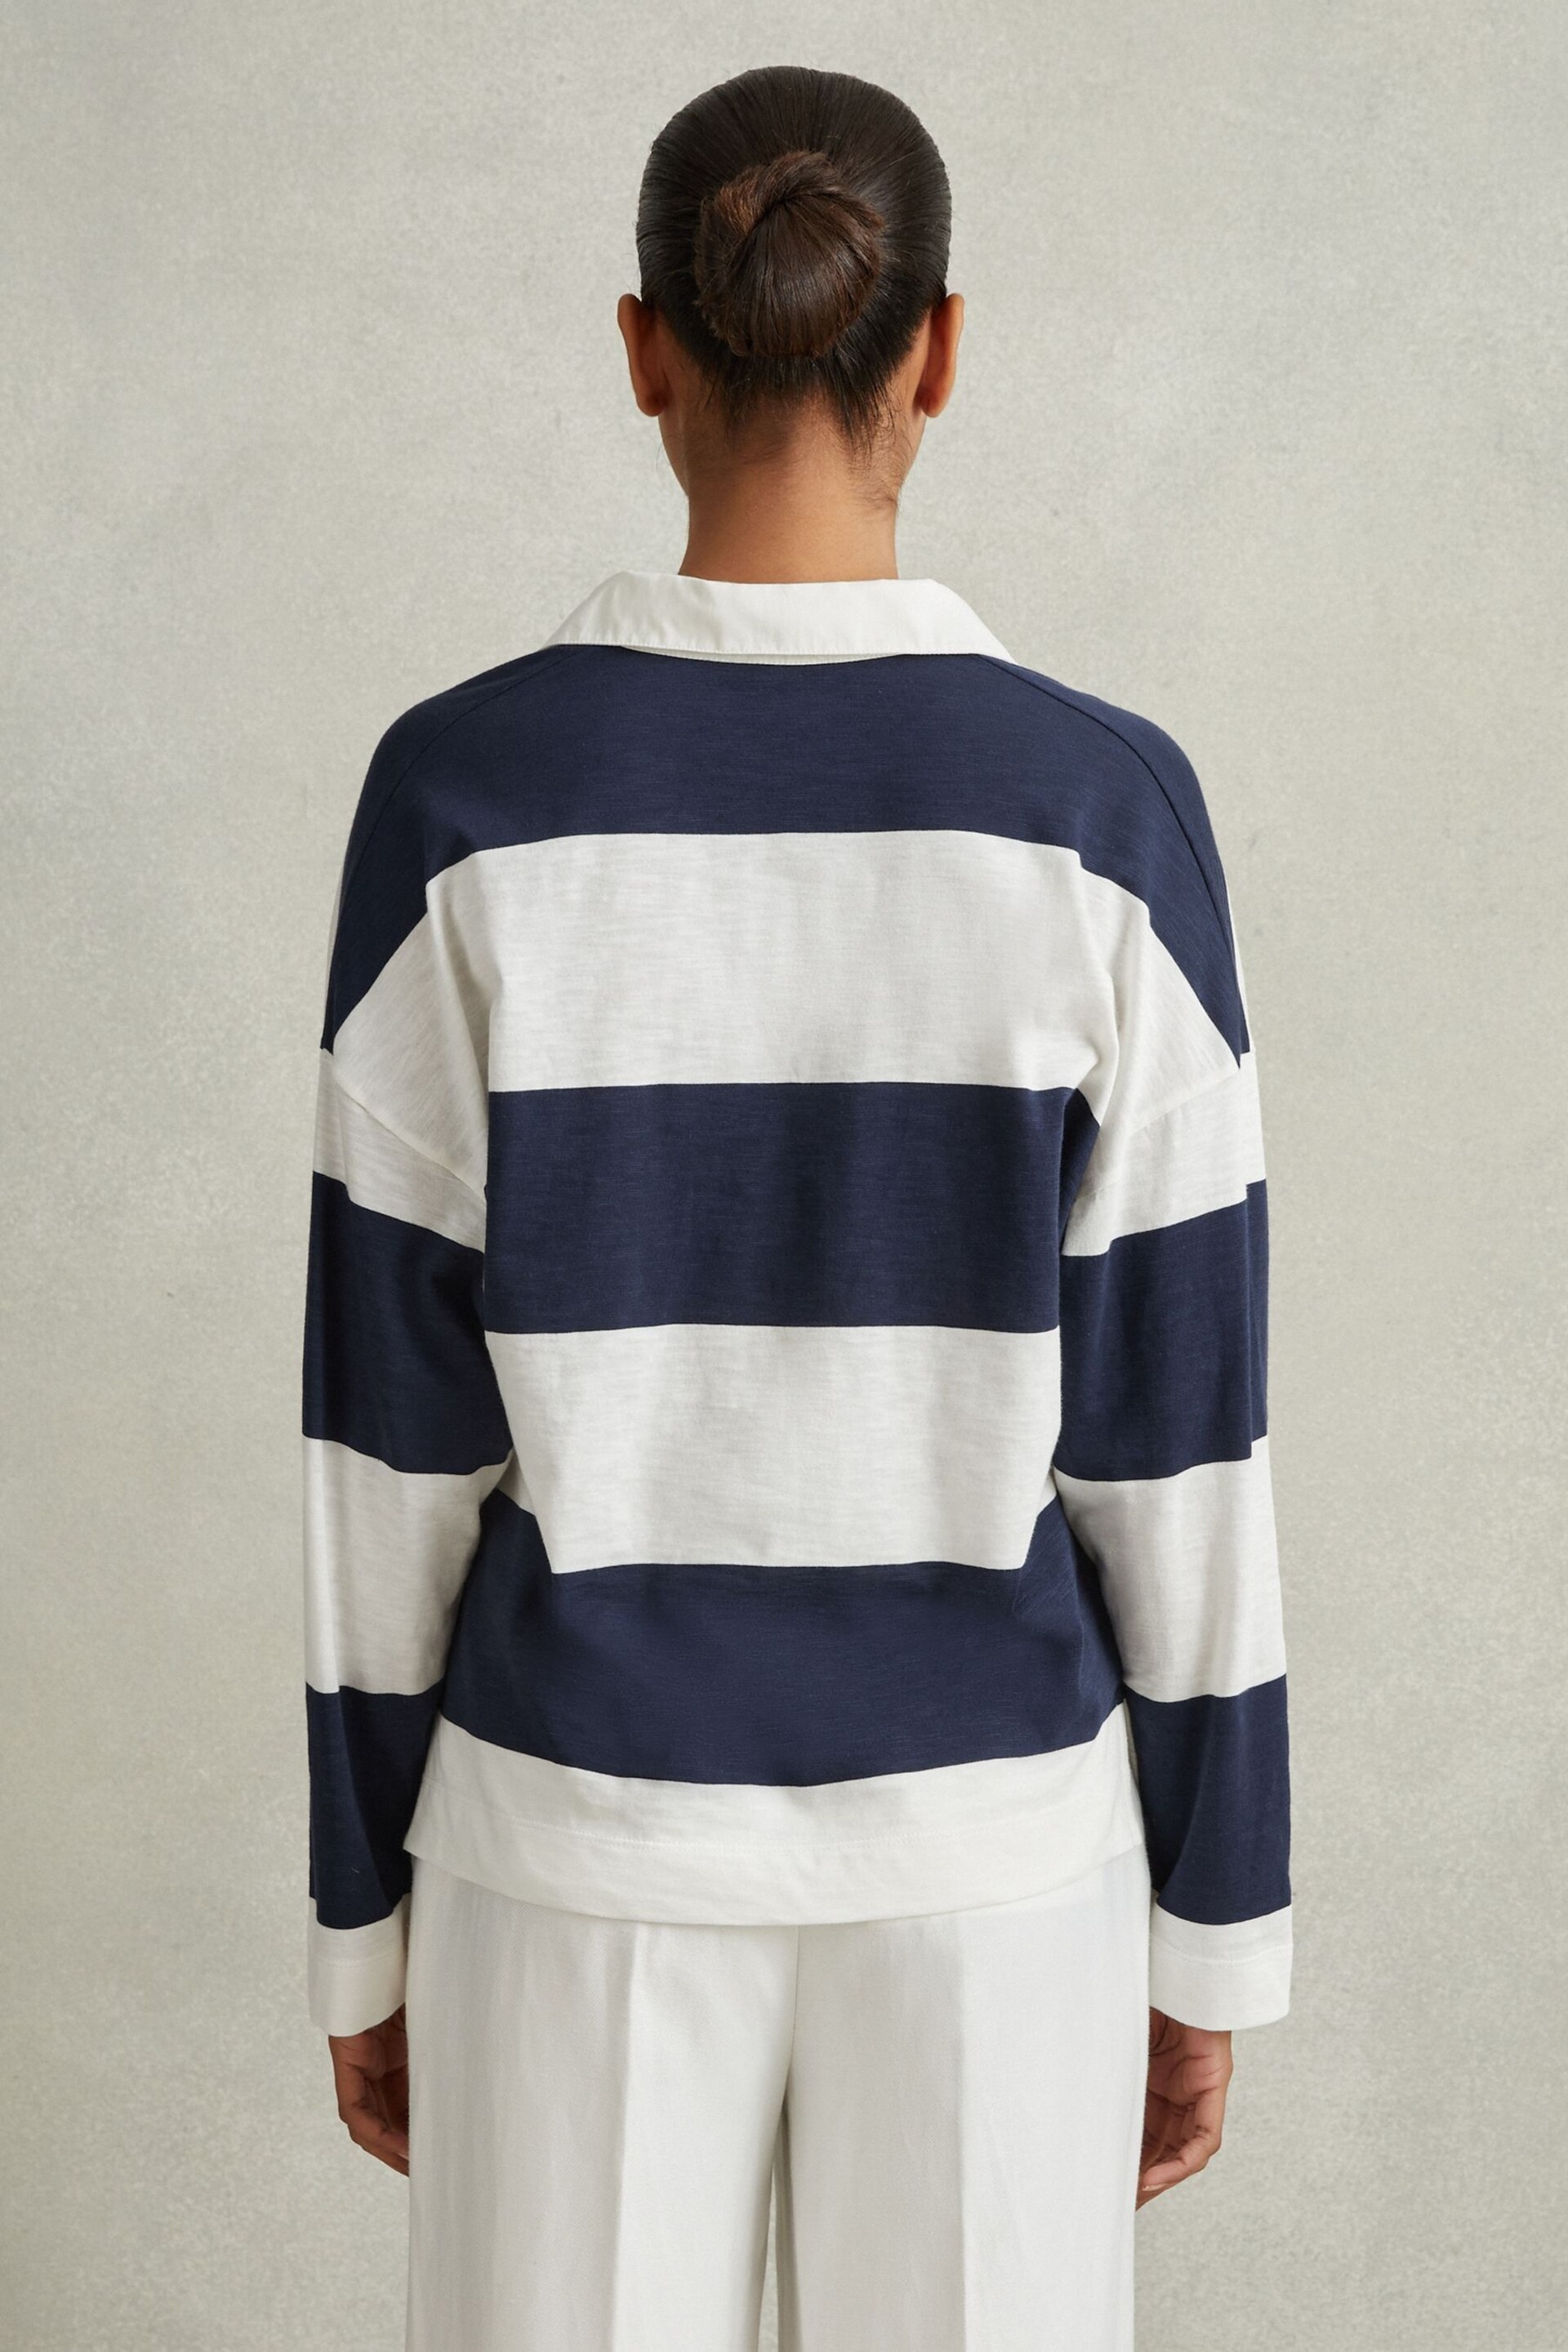 Reiss Navy/Ivory Abigail Striped Cotton Open-Collar T-Shirt - Image 5 of 6